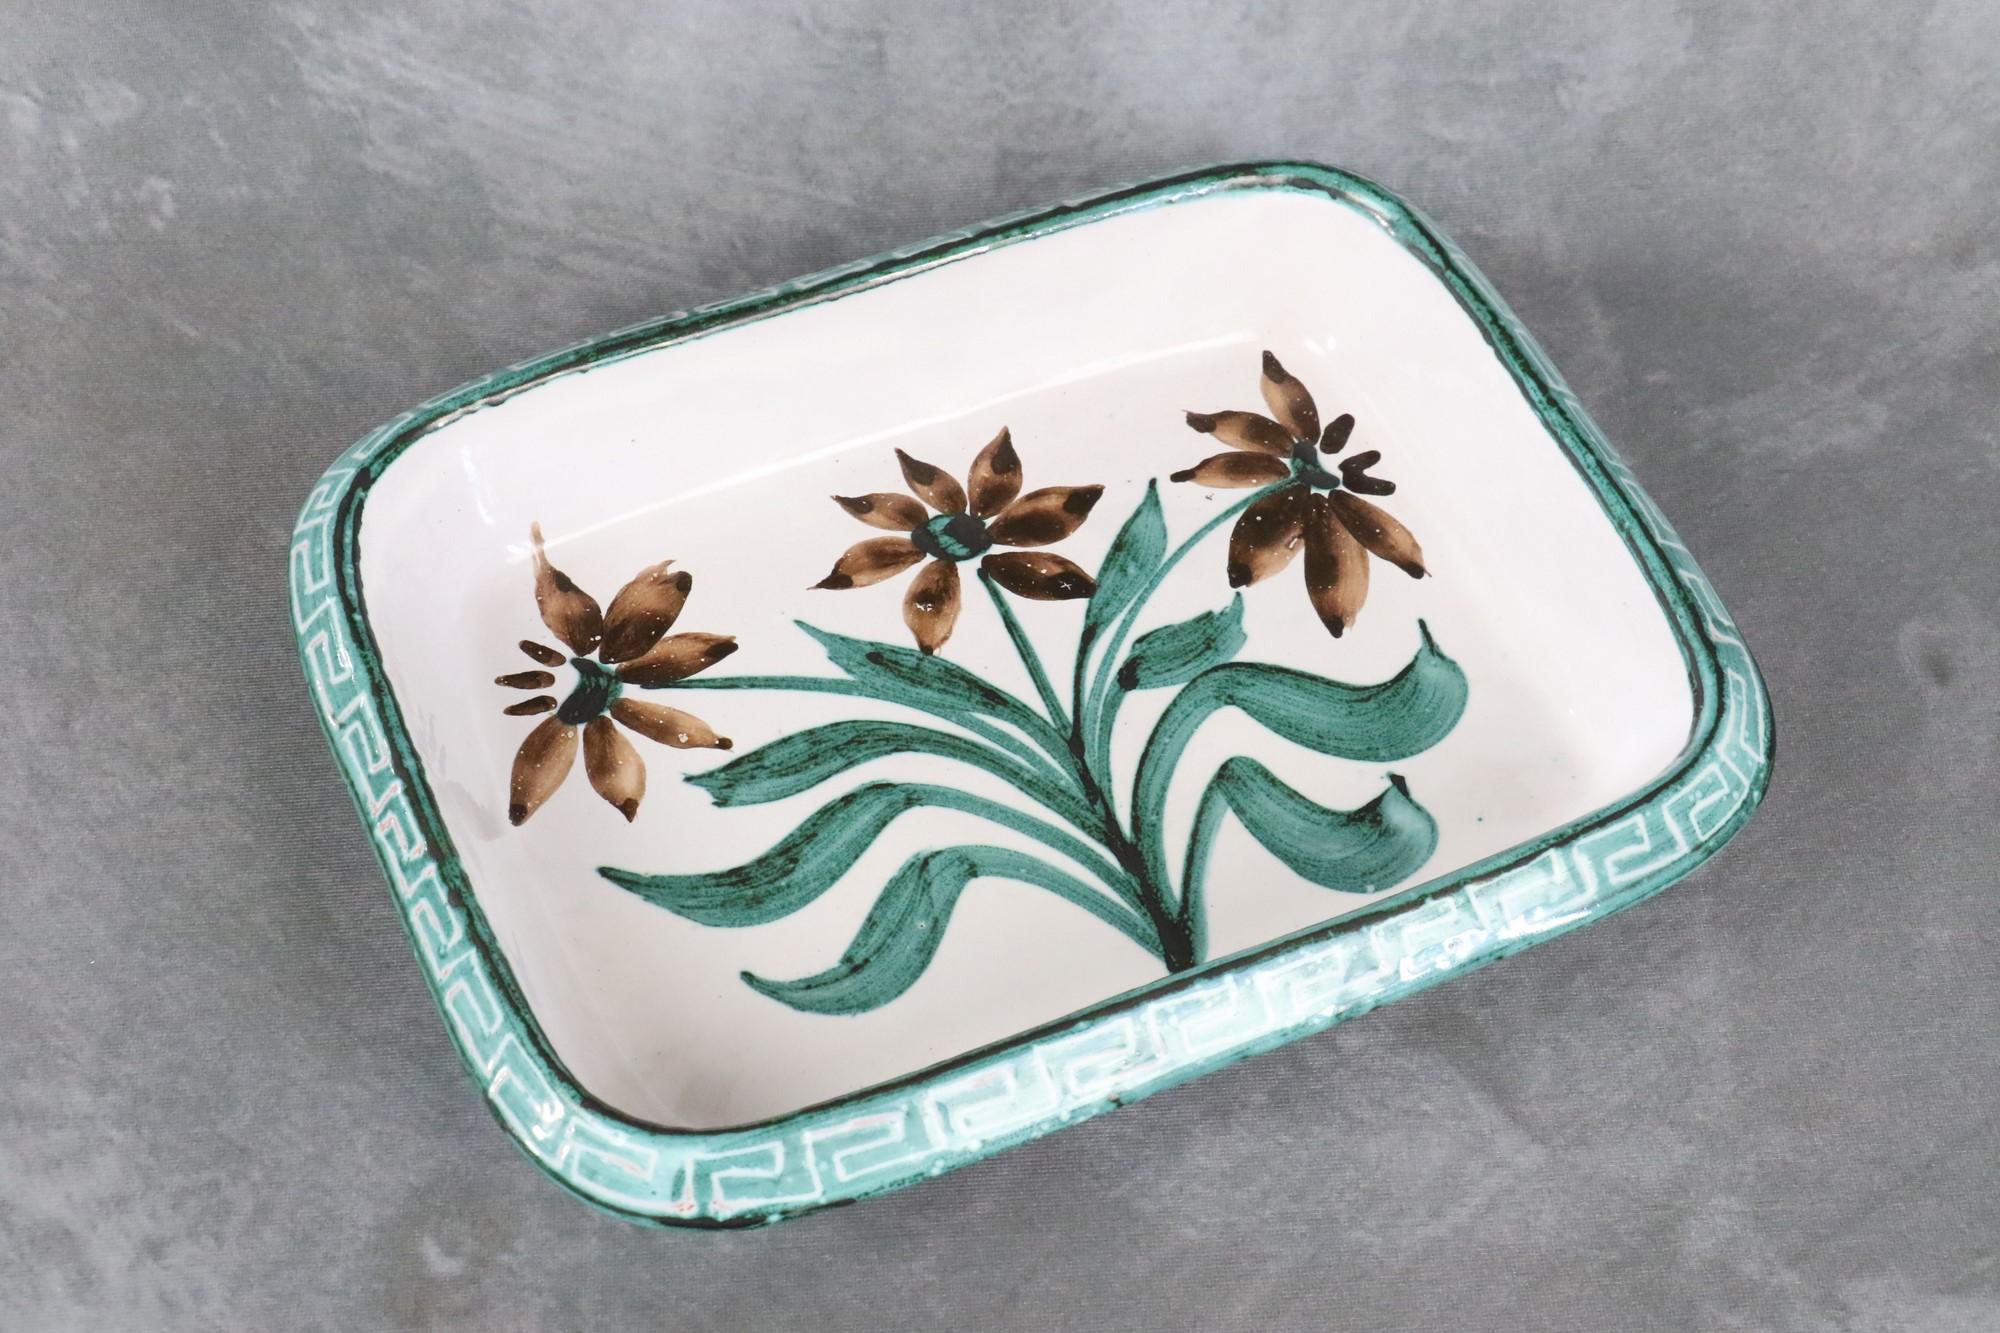 Enameled French Ceramic Dish by Robert Picault, Signed, Vallauris, France, 1950s